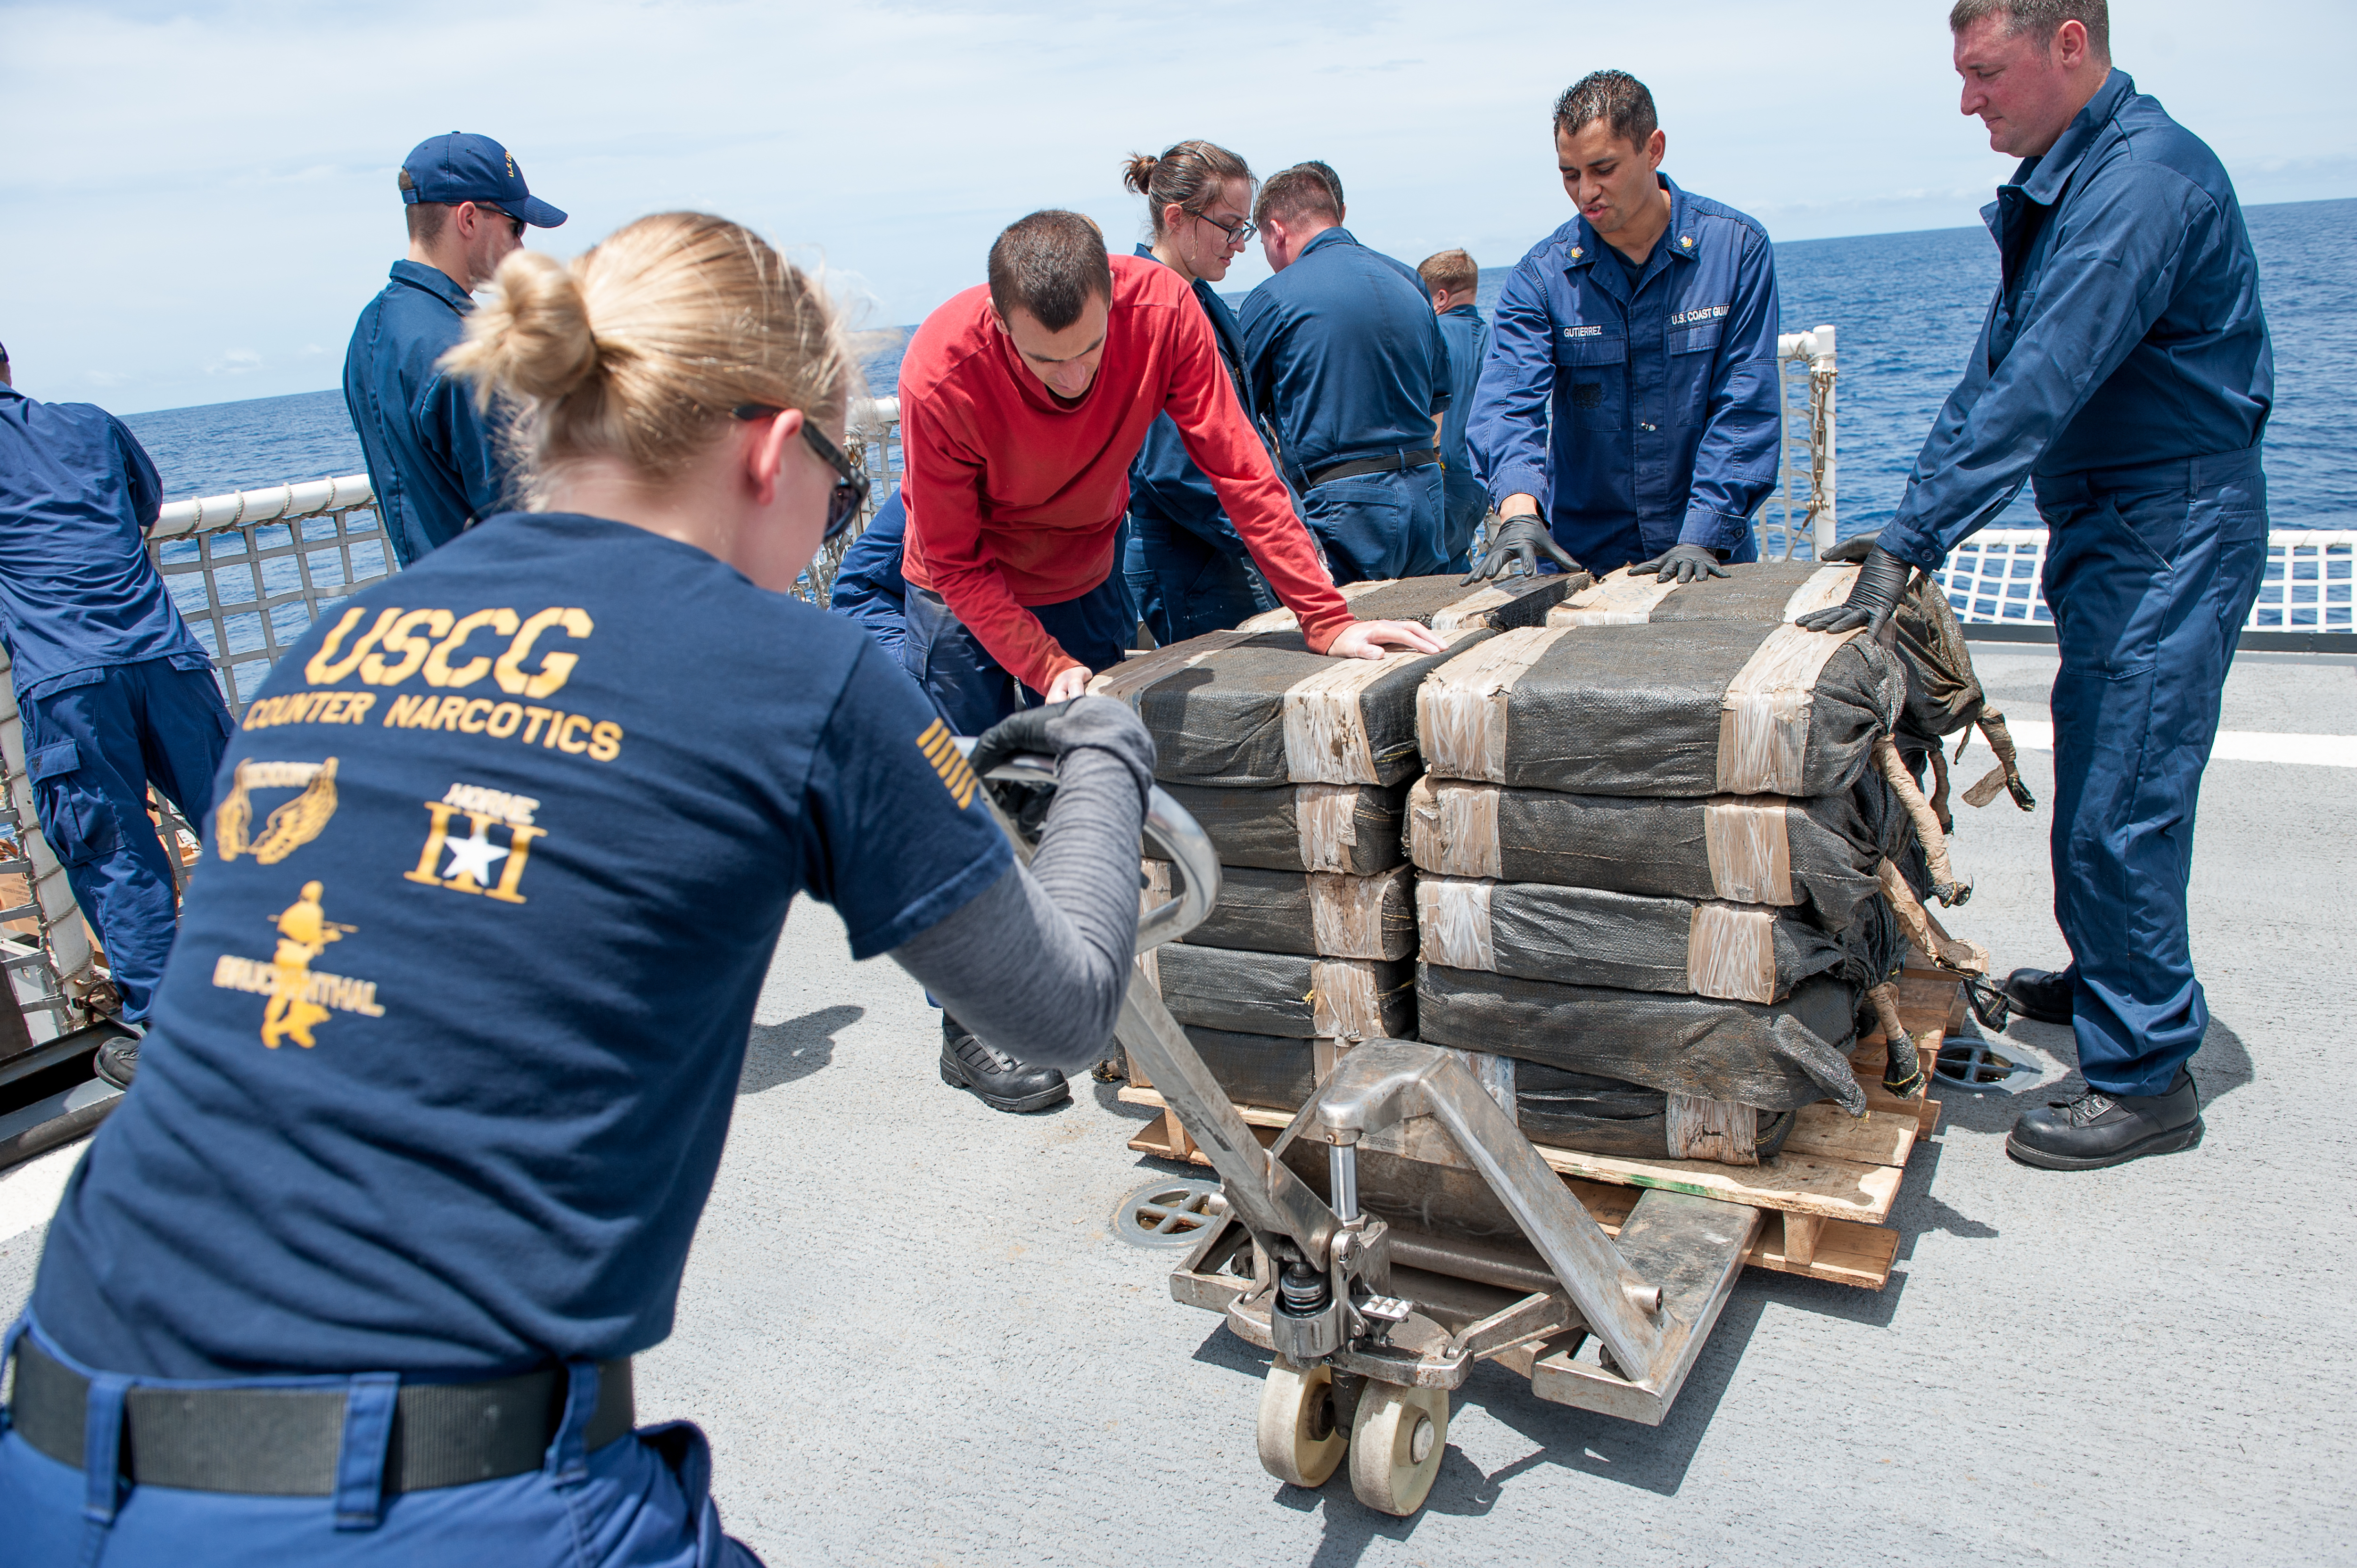 Coast Guard Cutter Stratton crewmembers secure cocaine bales from a self-propelled semi-submersible interdicted in international waters off the coast of Central America, July 19, 2015. The Coast Guard recovered more than 6 tons of cocaine from the 40-foot vessel. (Coast Guard photo courtesy of Petty Officer 2nd Class LaNola Stone)